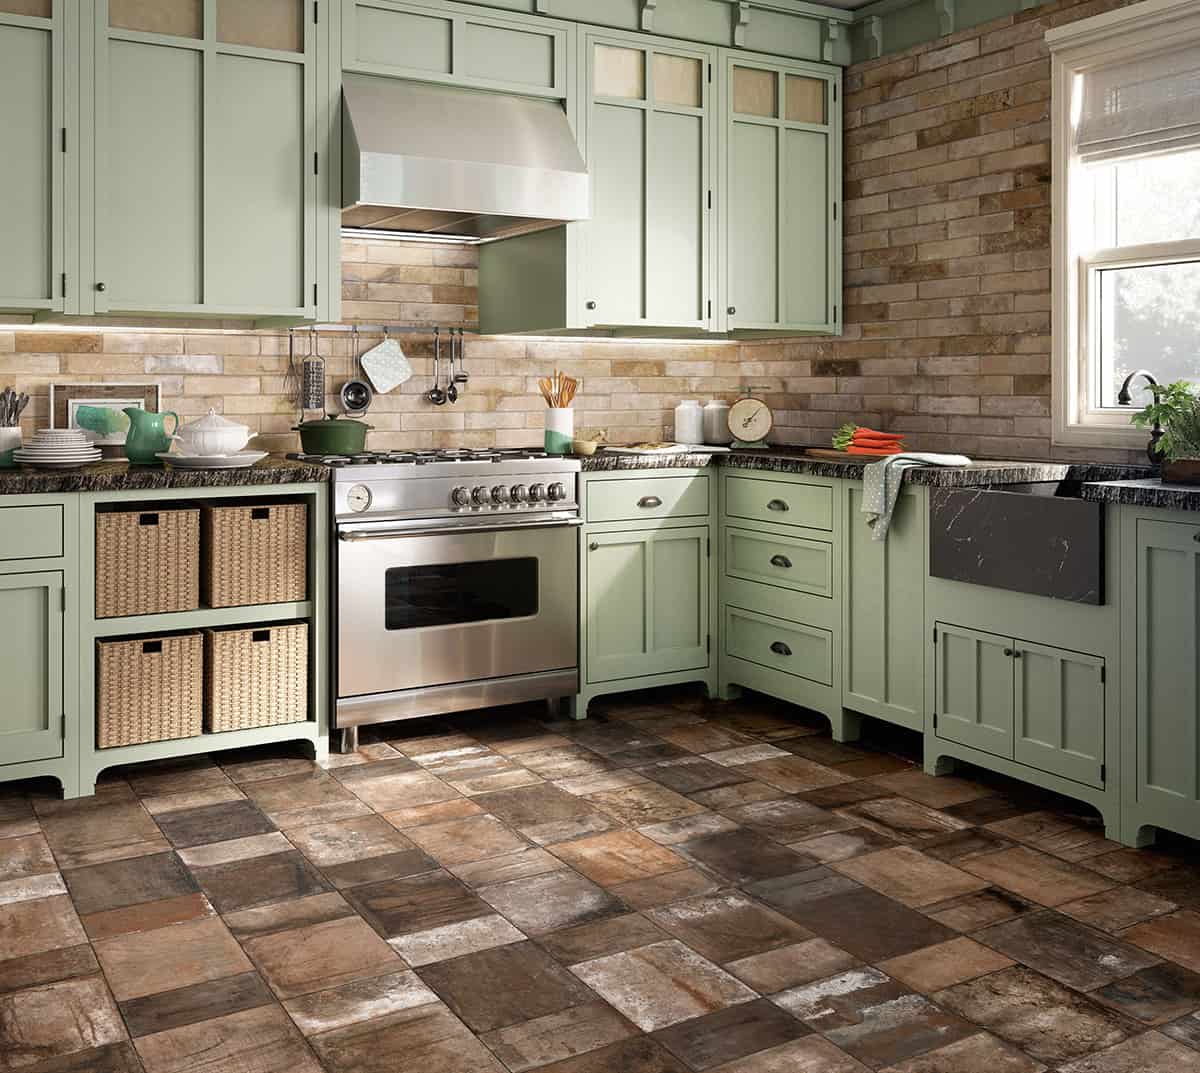 25 Beautiful Tile Flooring Ideas for Living Room, Kitchen and Bathroom Designs